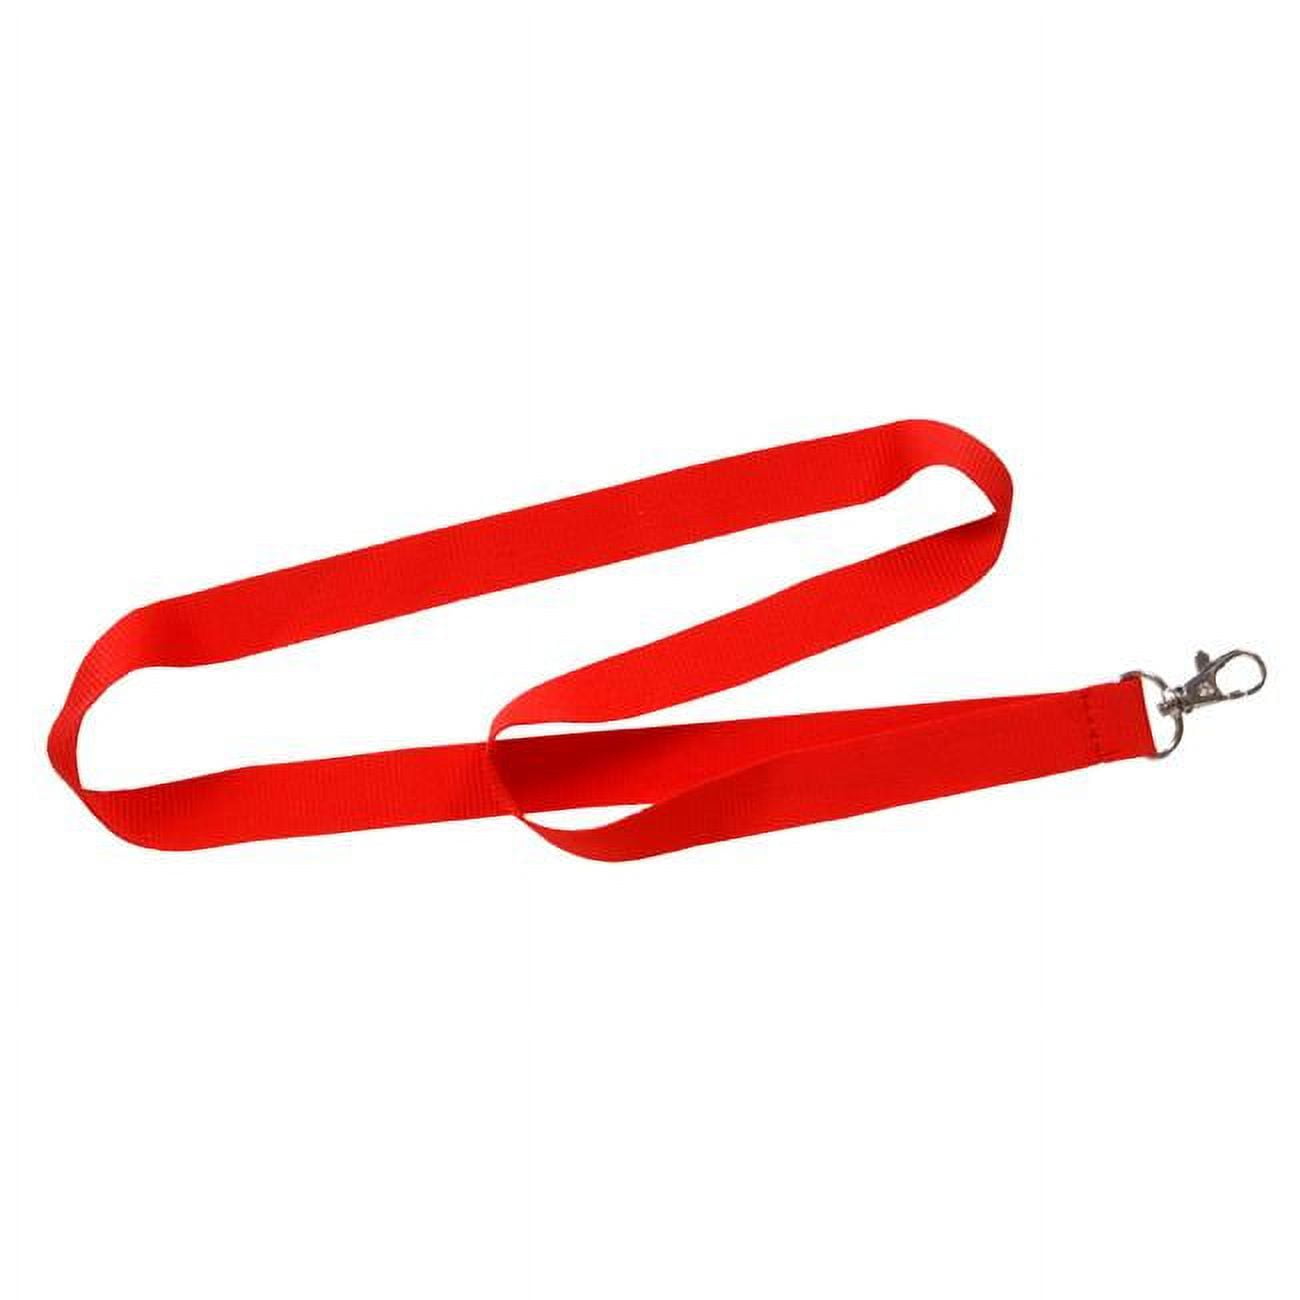 2PCS Lanyard Keychain Cable for USB Flash Drive Strap String 7CM Key Chain